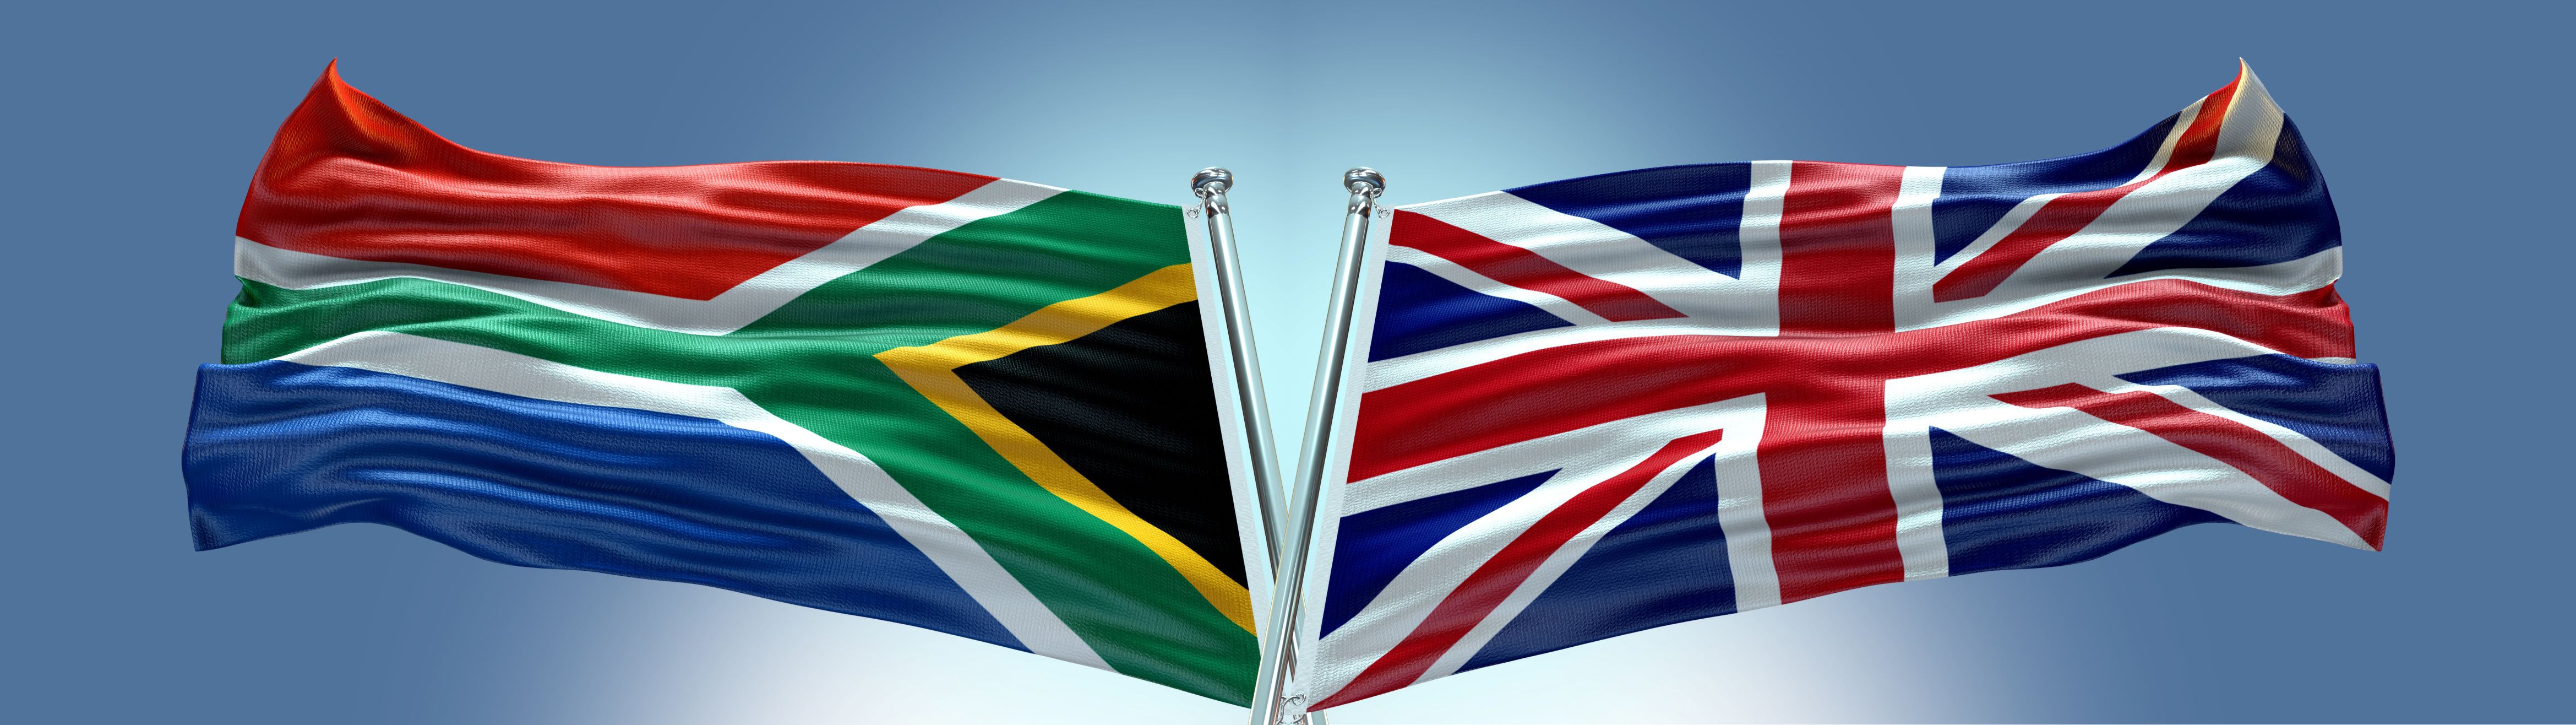 UK South Africa flags - trade talks